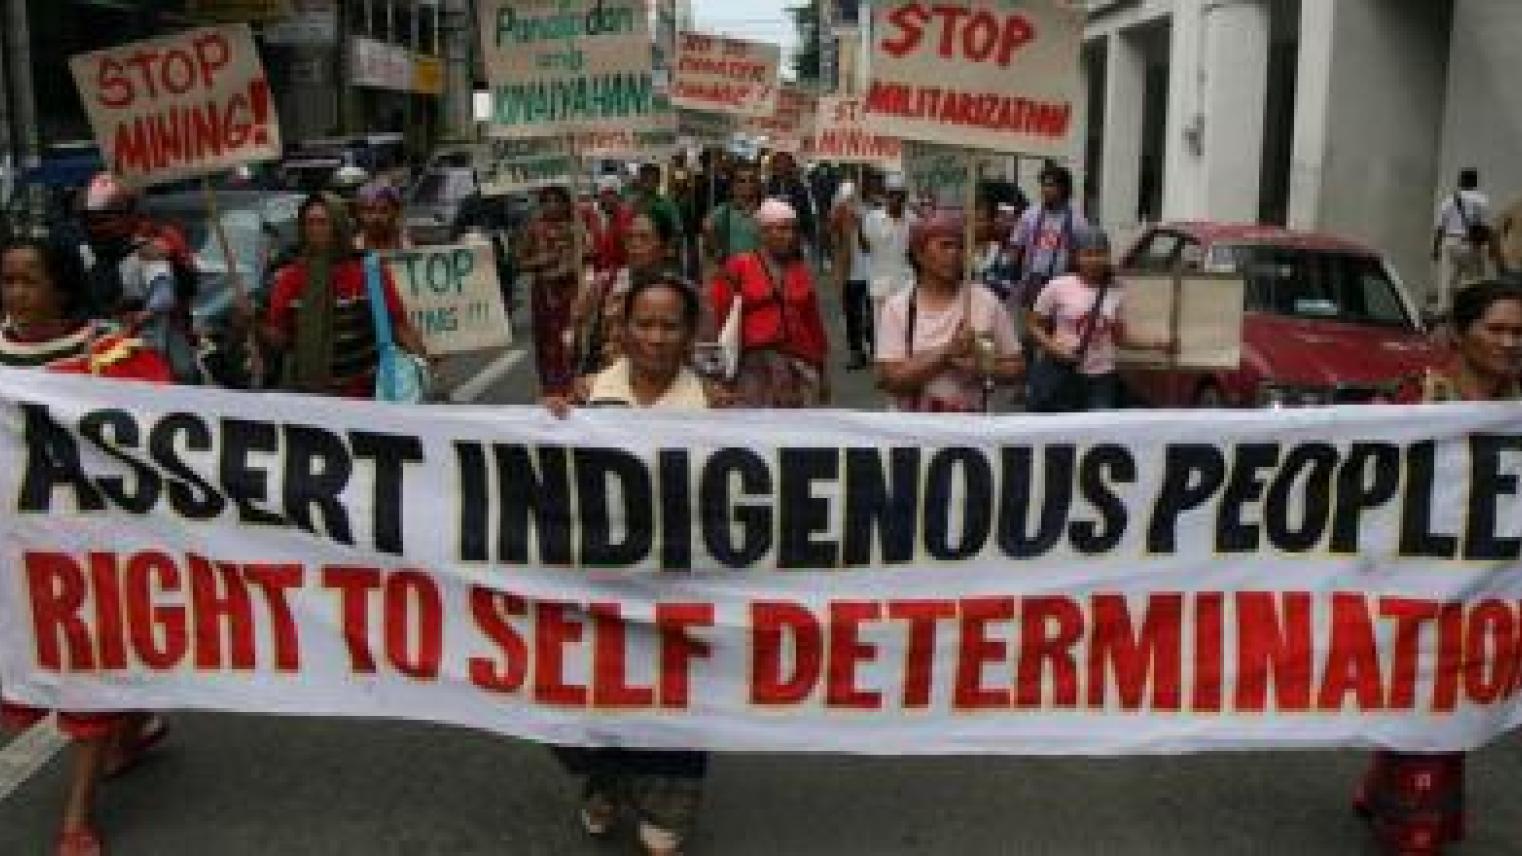 Image of Lumads marching with “Assert Indigenous Peoples right to self determination” banner in Davao City, Philippines by Keith Bacongo on flickr (https://flic.kr/p/59tNEG) (CC BY 2.0) 